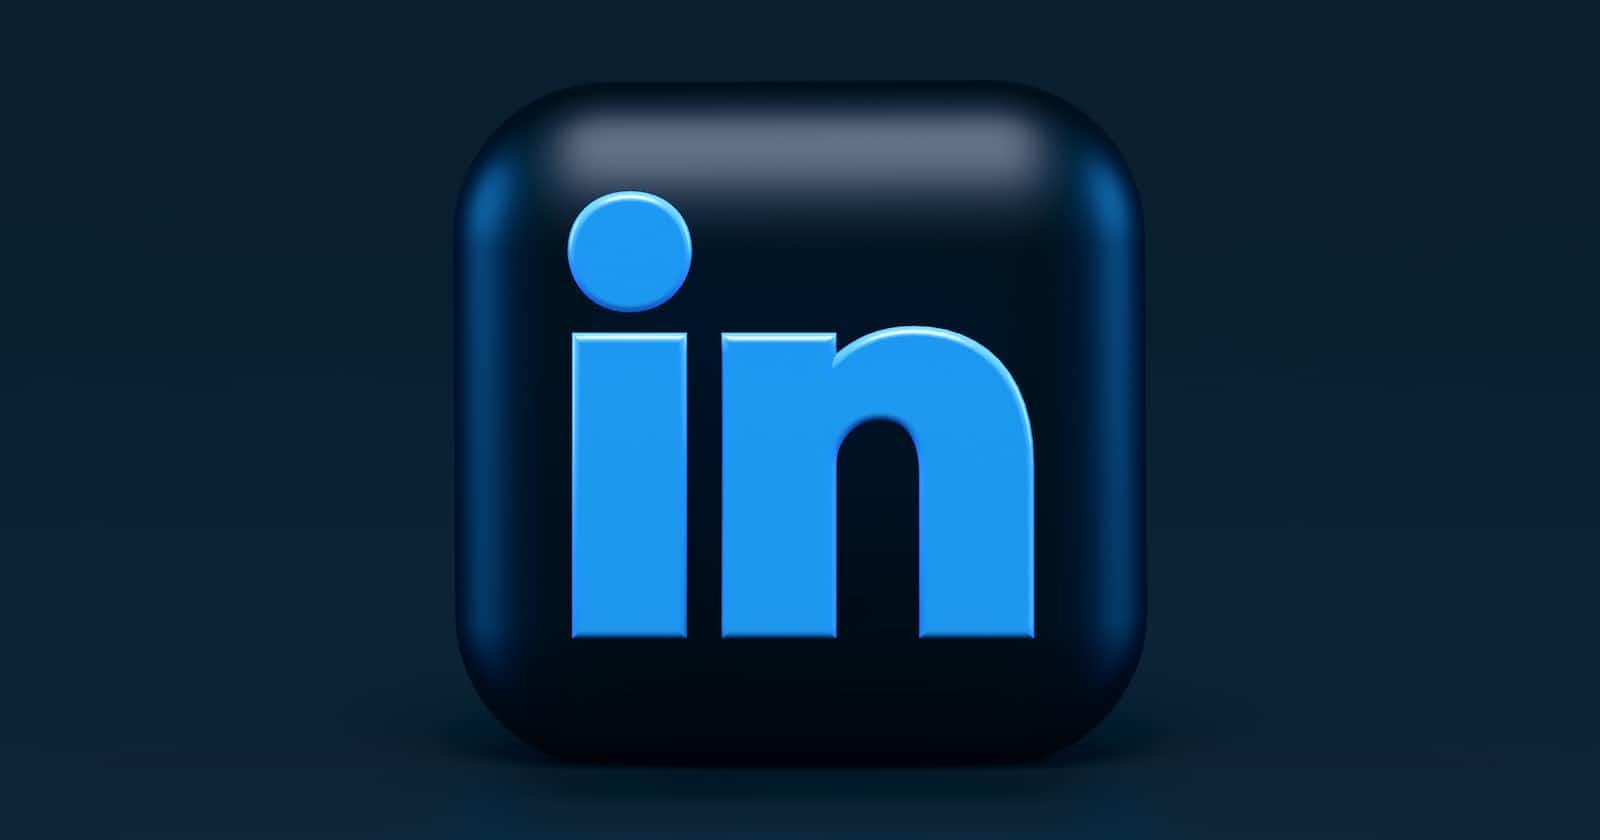 Day 6 of my ALX Software Engineering Journey: LinkedIn Connects, Grit